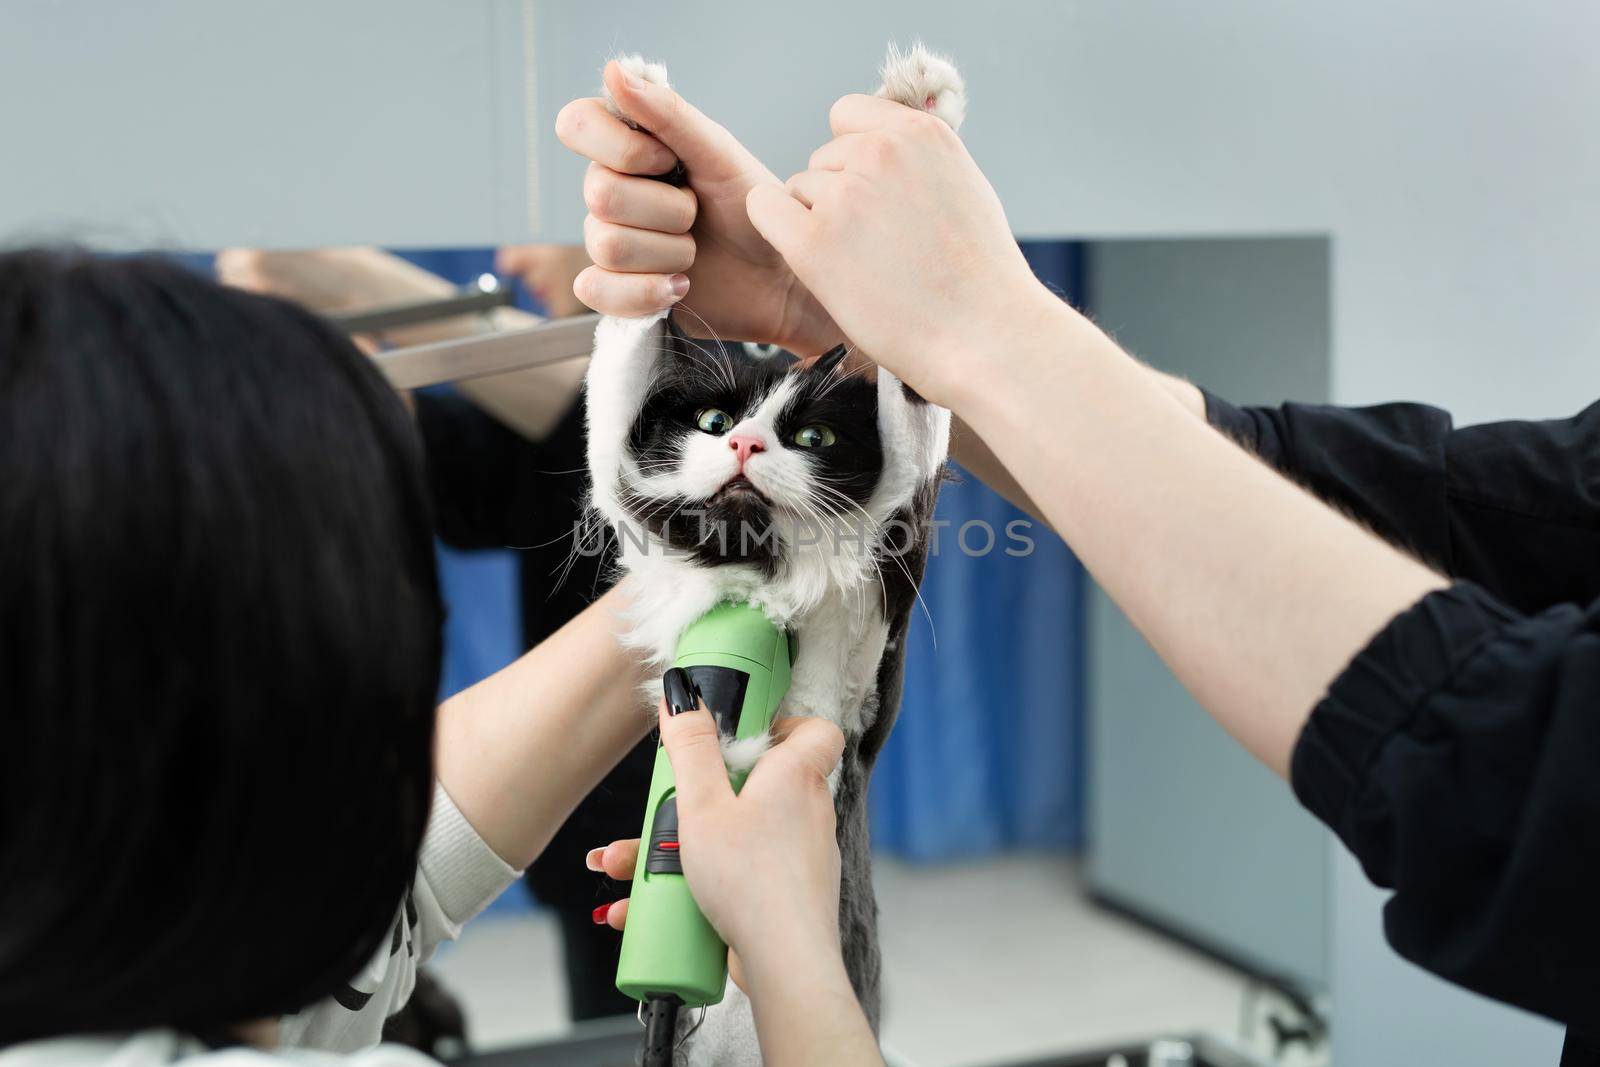 Grooming master cuts and shaves a cat, cares for a cat. The vet uses an electric shaving machine for the cat. The man helps and holds the cat by the paws.